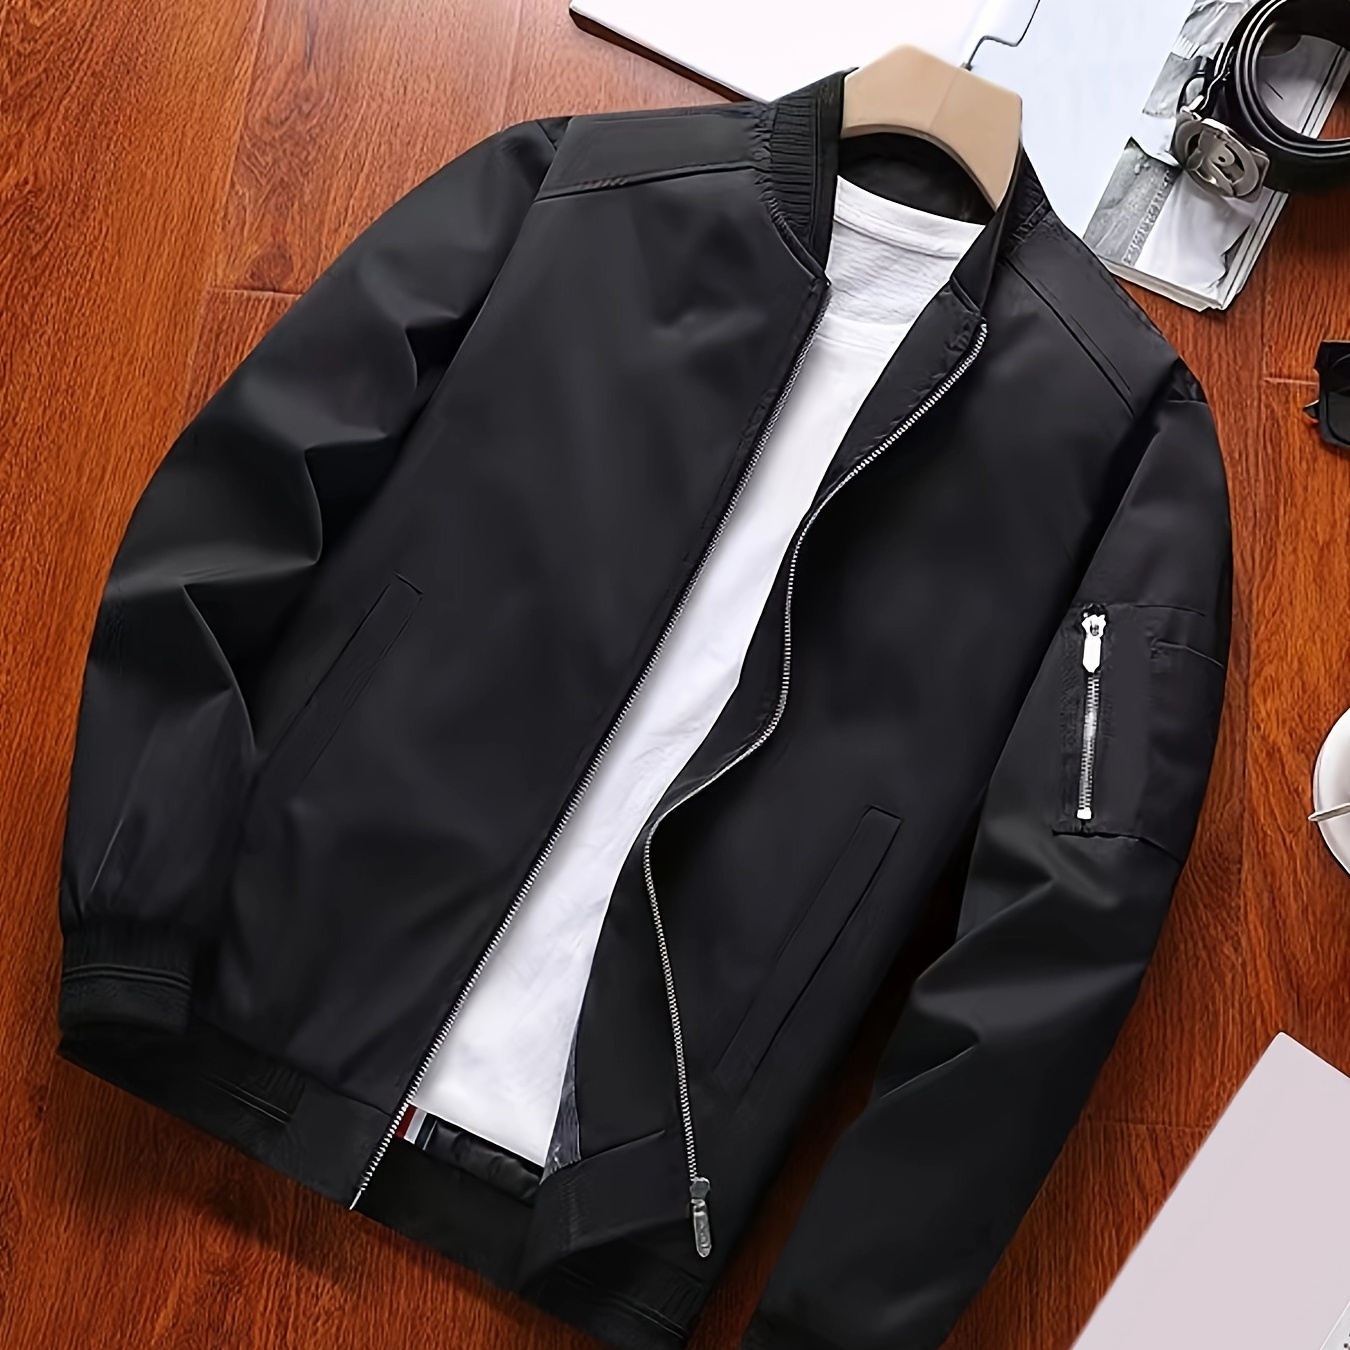 

Classic Design Jacket, Men's Casual Stand Collar Solid Collar Zip Up Jacket For Spring Fall